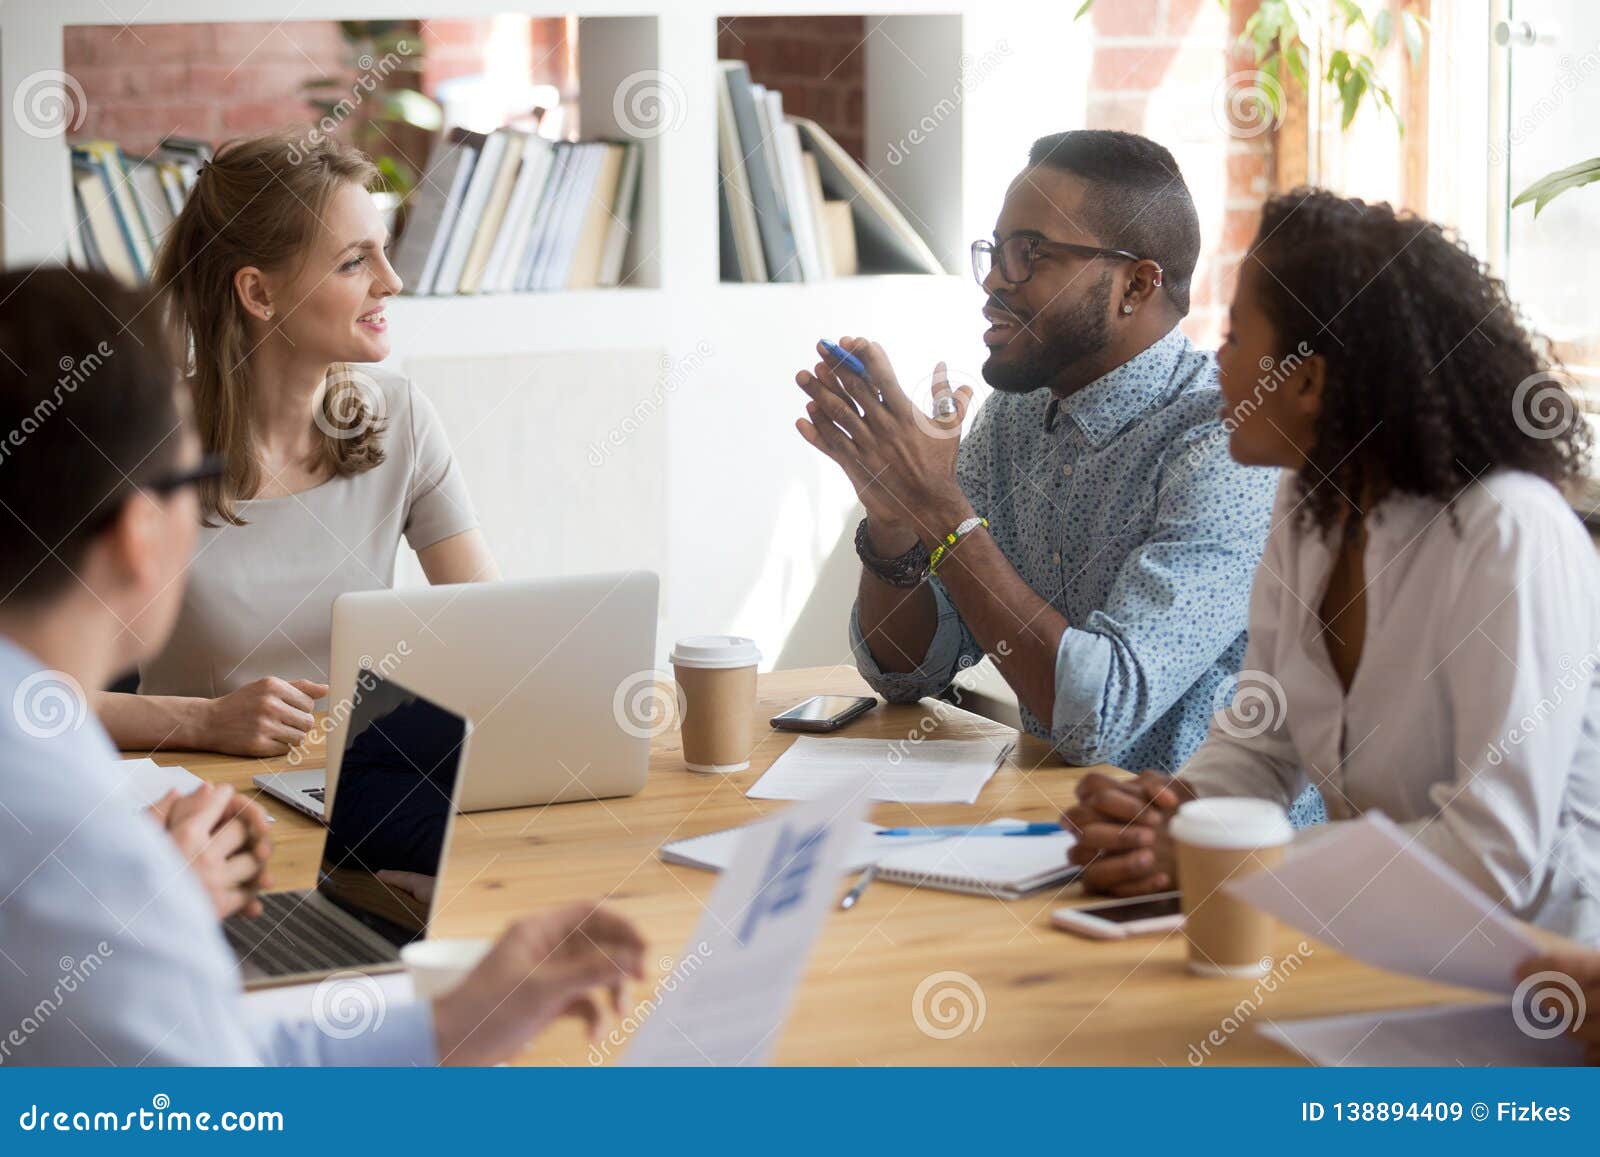 african male employee speaking sharing ideas at diverse team meeting